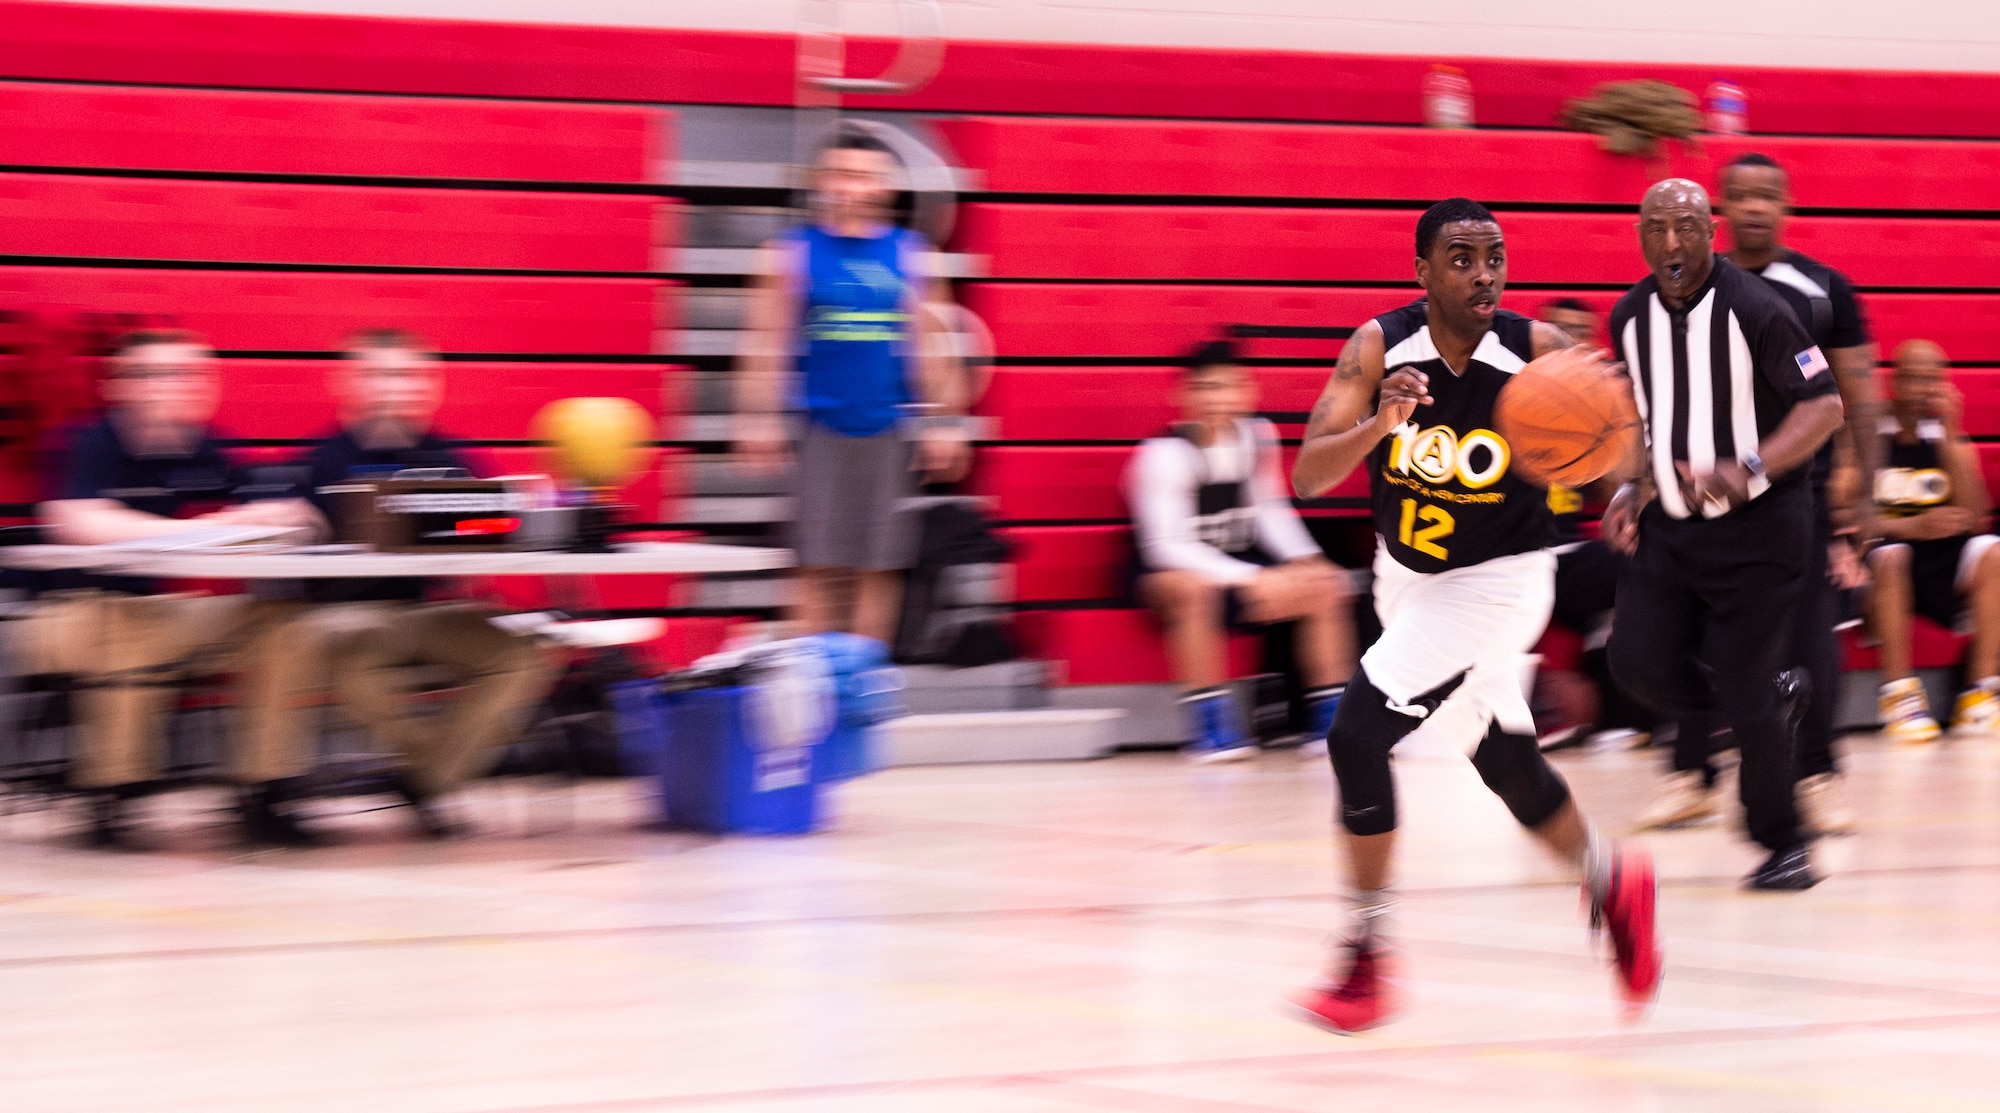 A U.S. Soldier assigned to U.S. Army Central Command (ARCENT) dribbles the ball down-court during an intramural basketball championship game at Shaw Air Force Base, S.C., March 14, 2019.